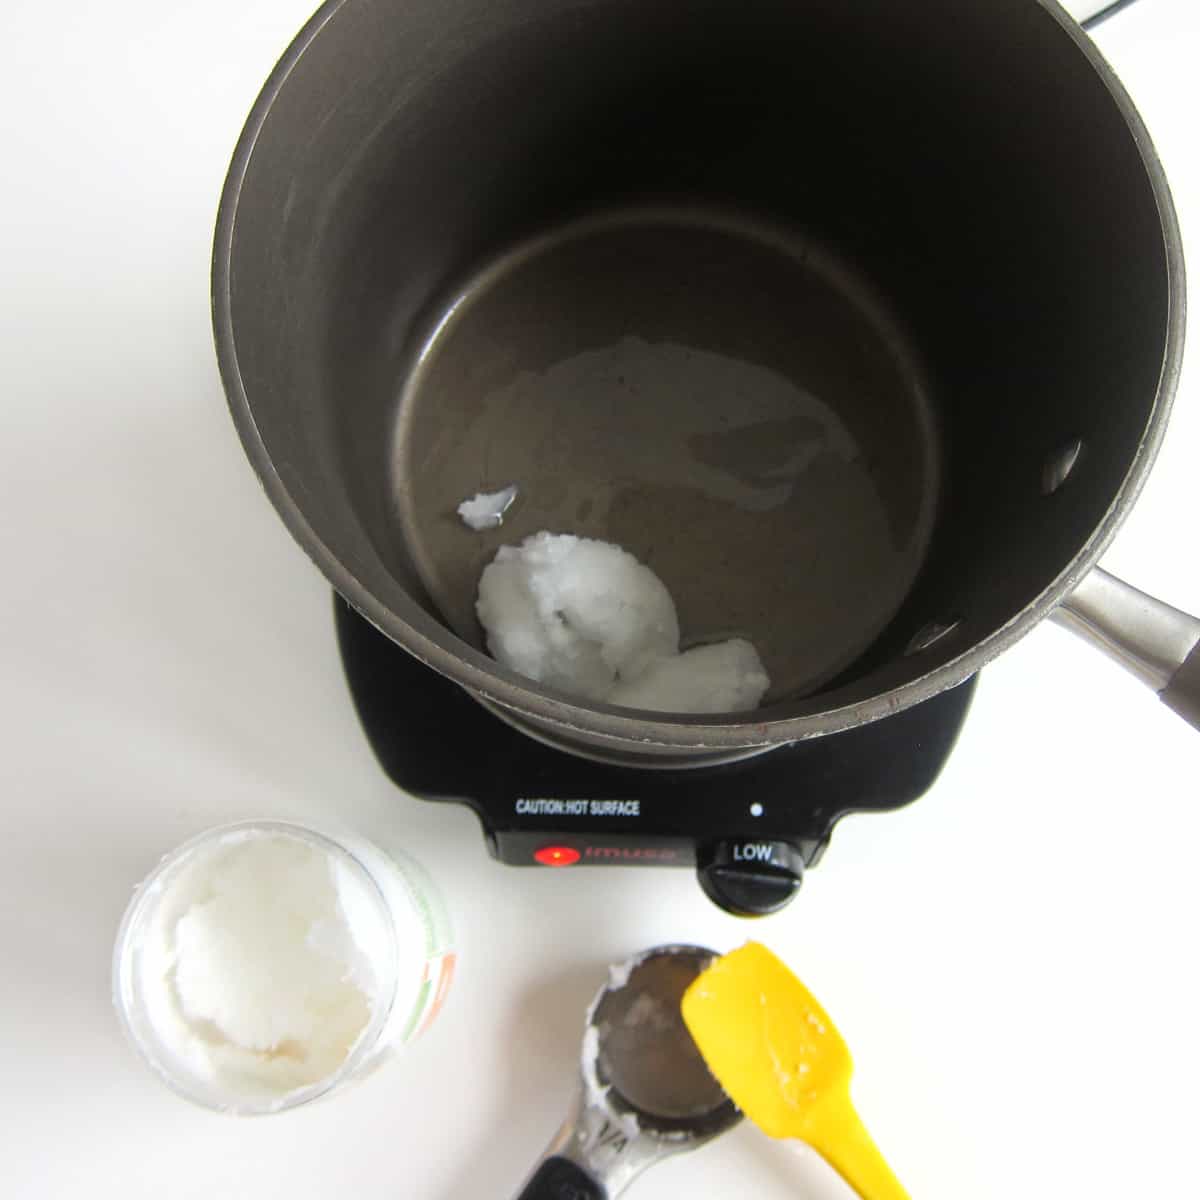 melting coconut oil in a saucepan set over low heat